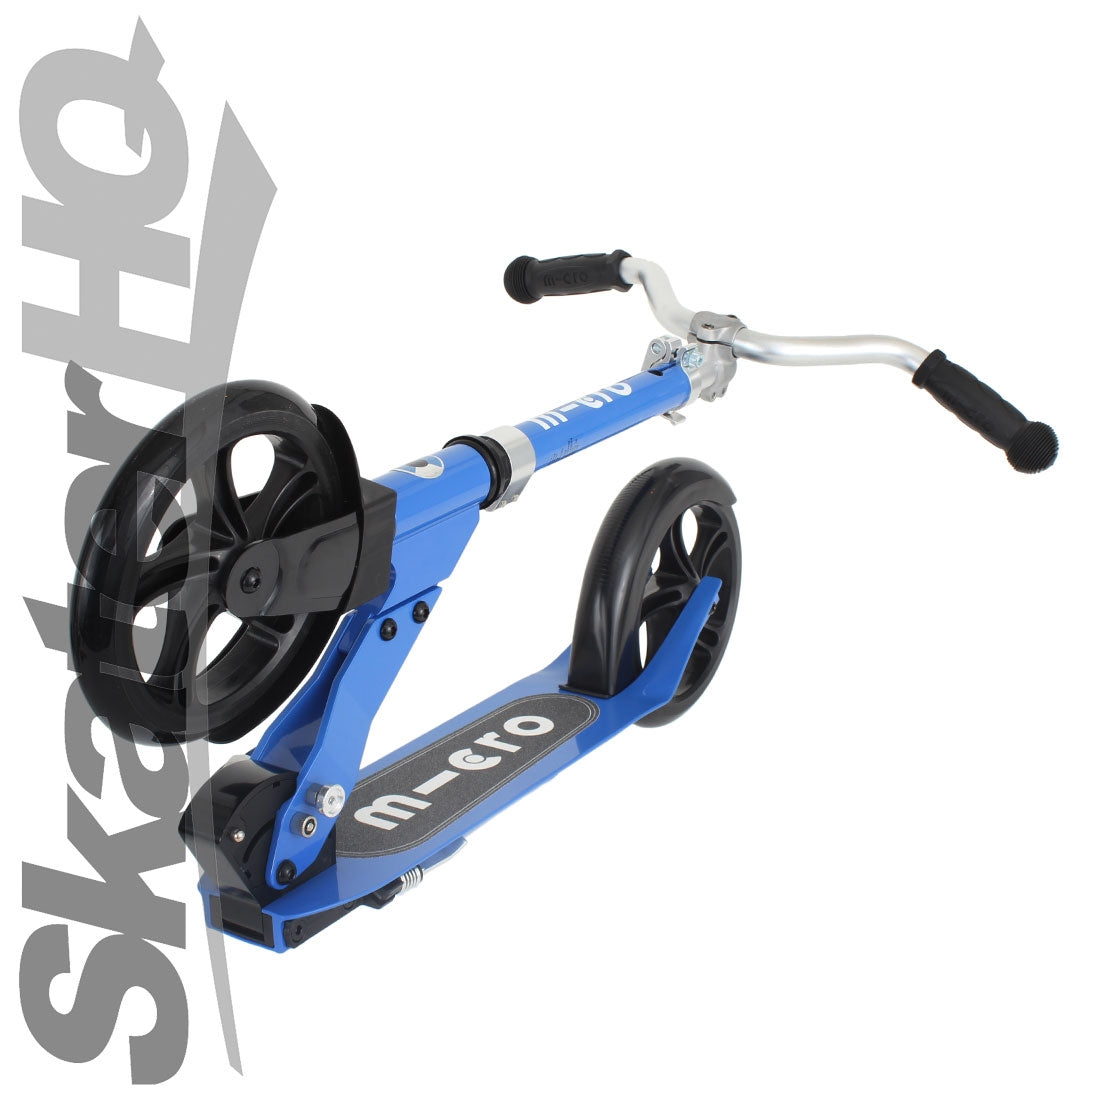 Micro Cruiser Scooter - Blue Scooter Completes Rec